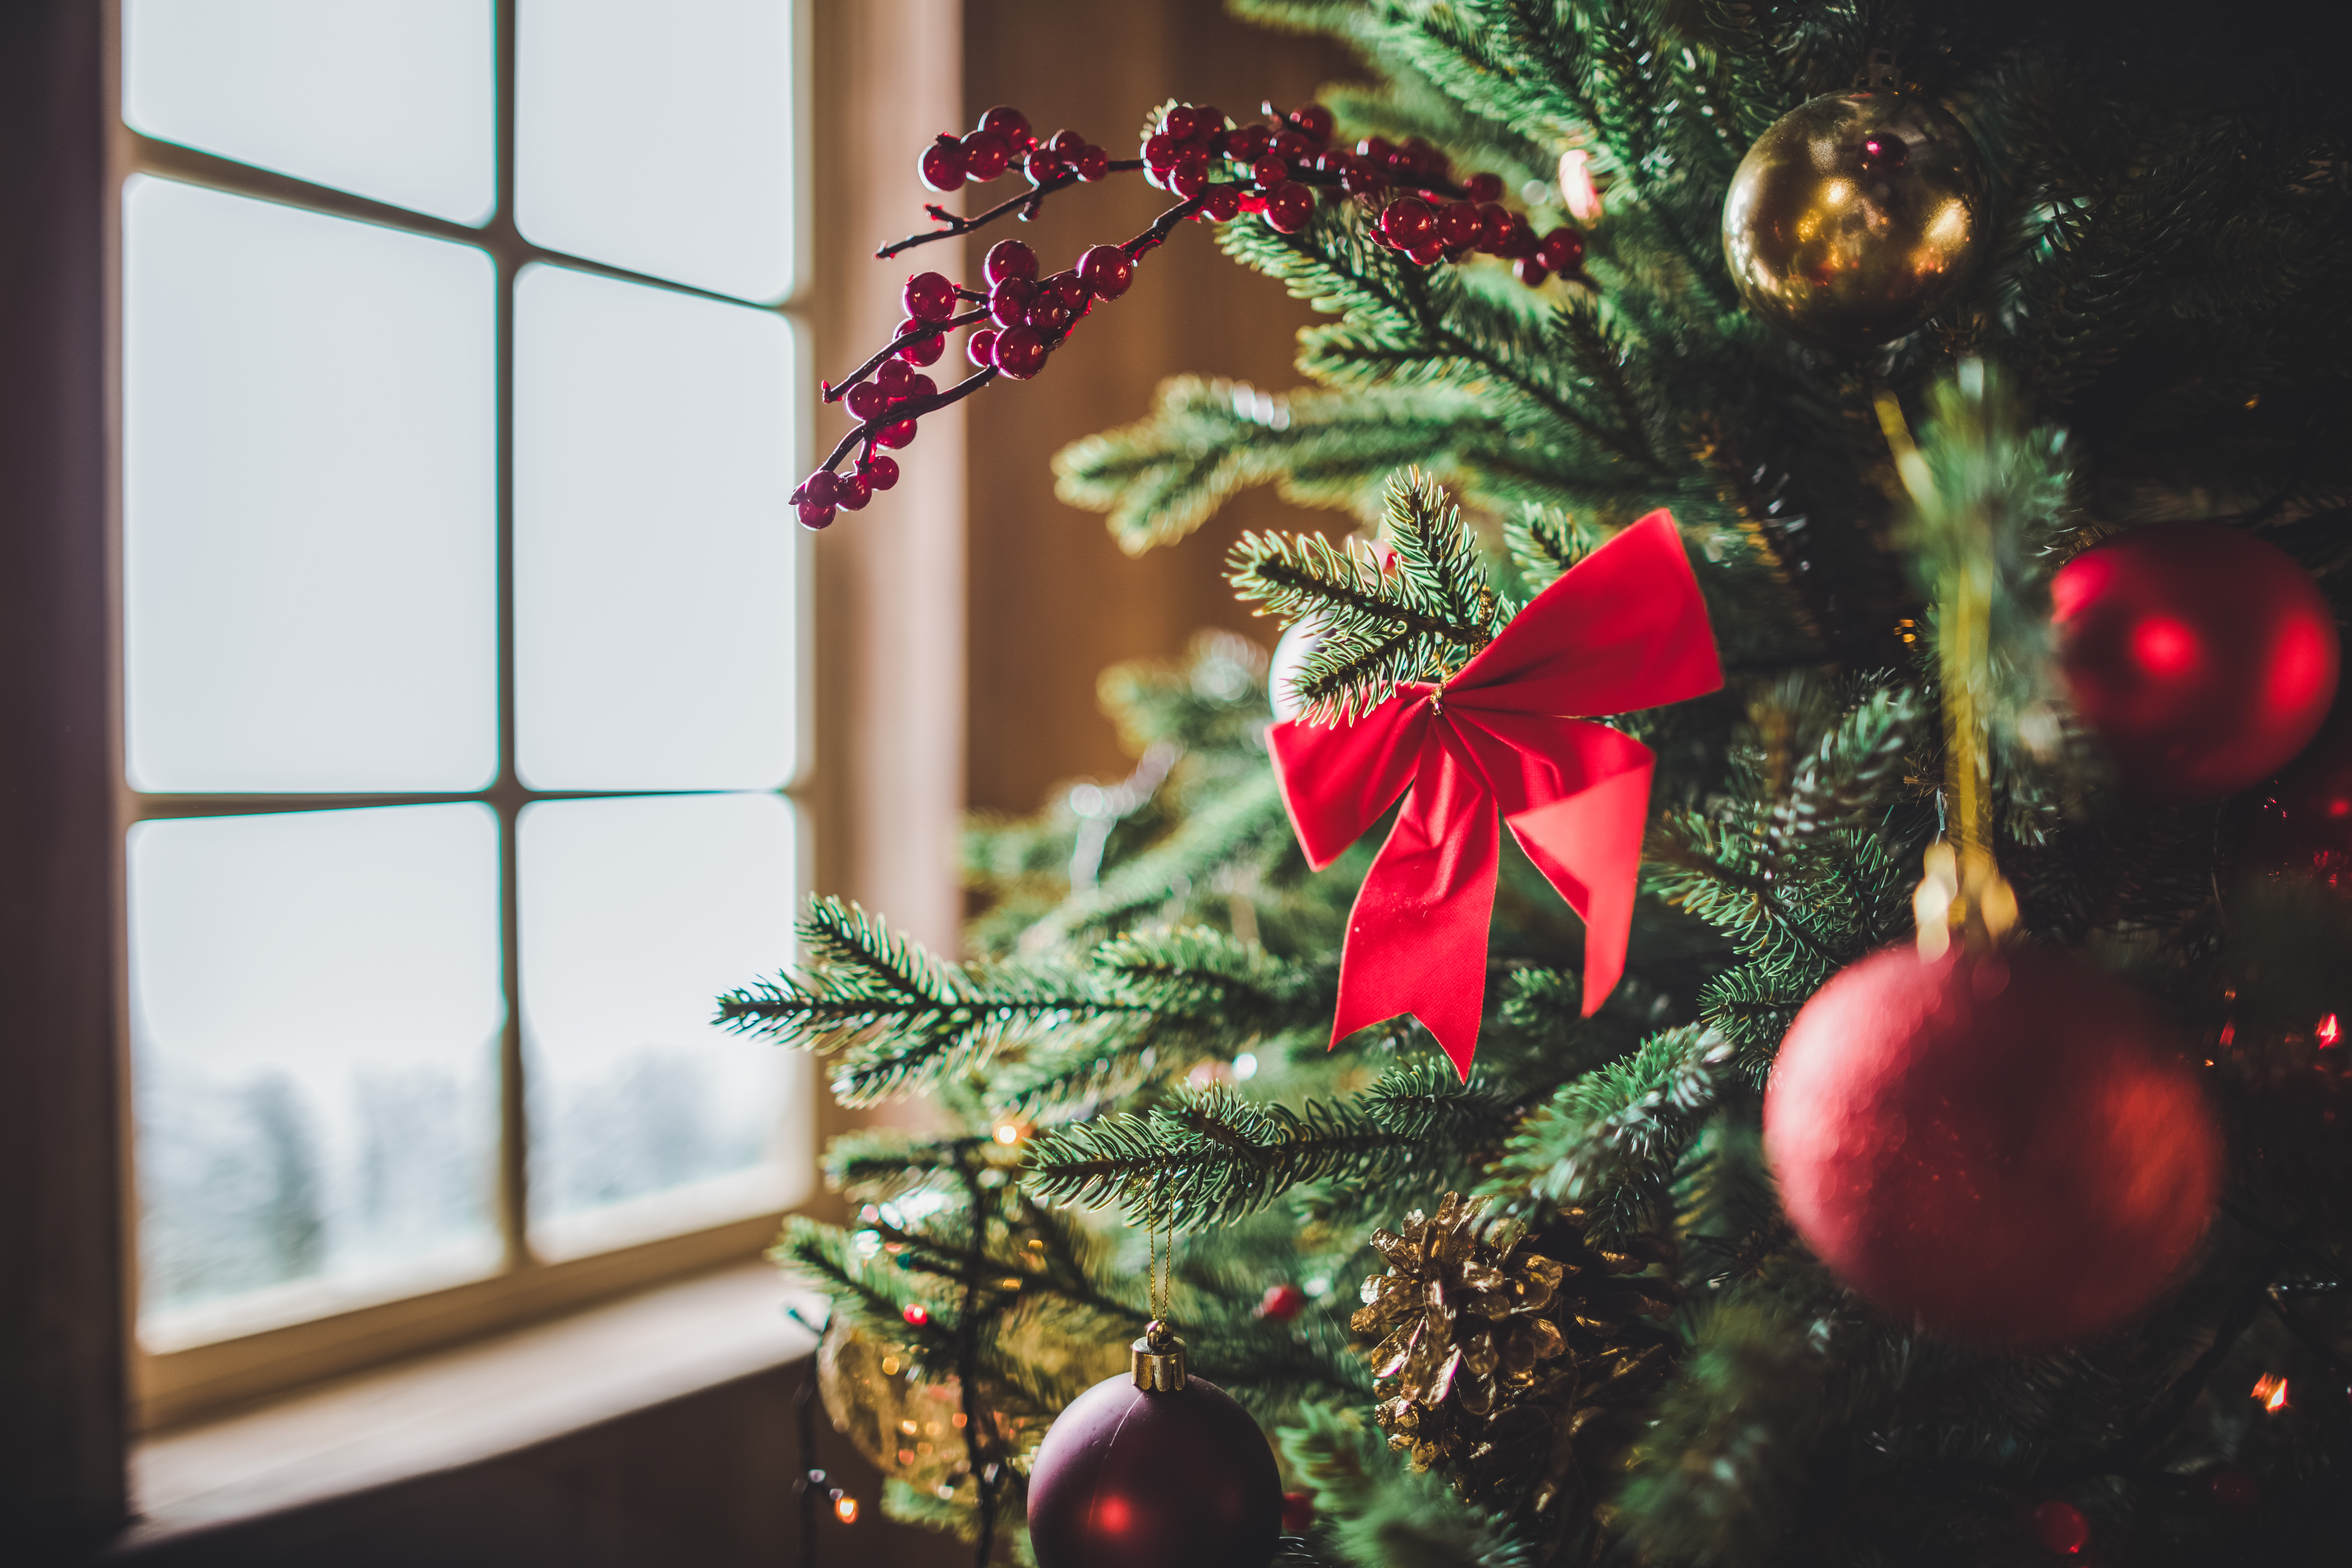 Christmas is a popular holiday celebrated by millions around the world. Over the centuries, the way it is observed has significantly evolved. Here, we'll compare Christmas celebrations of the past (let’s consider the Victorian era) to our modern-day festivities.